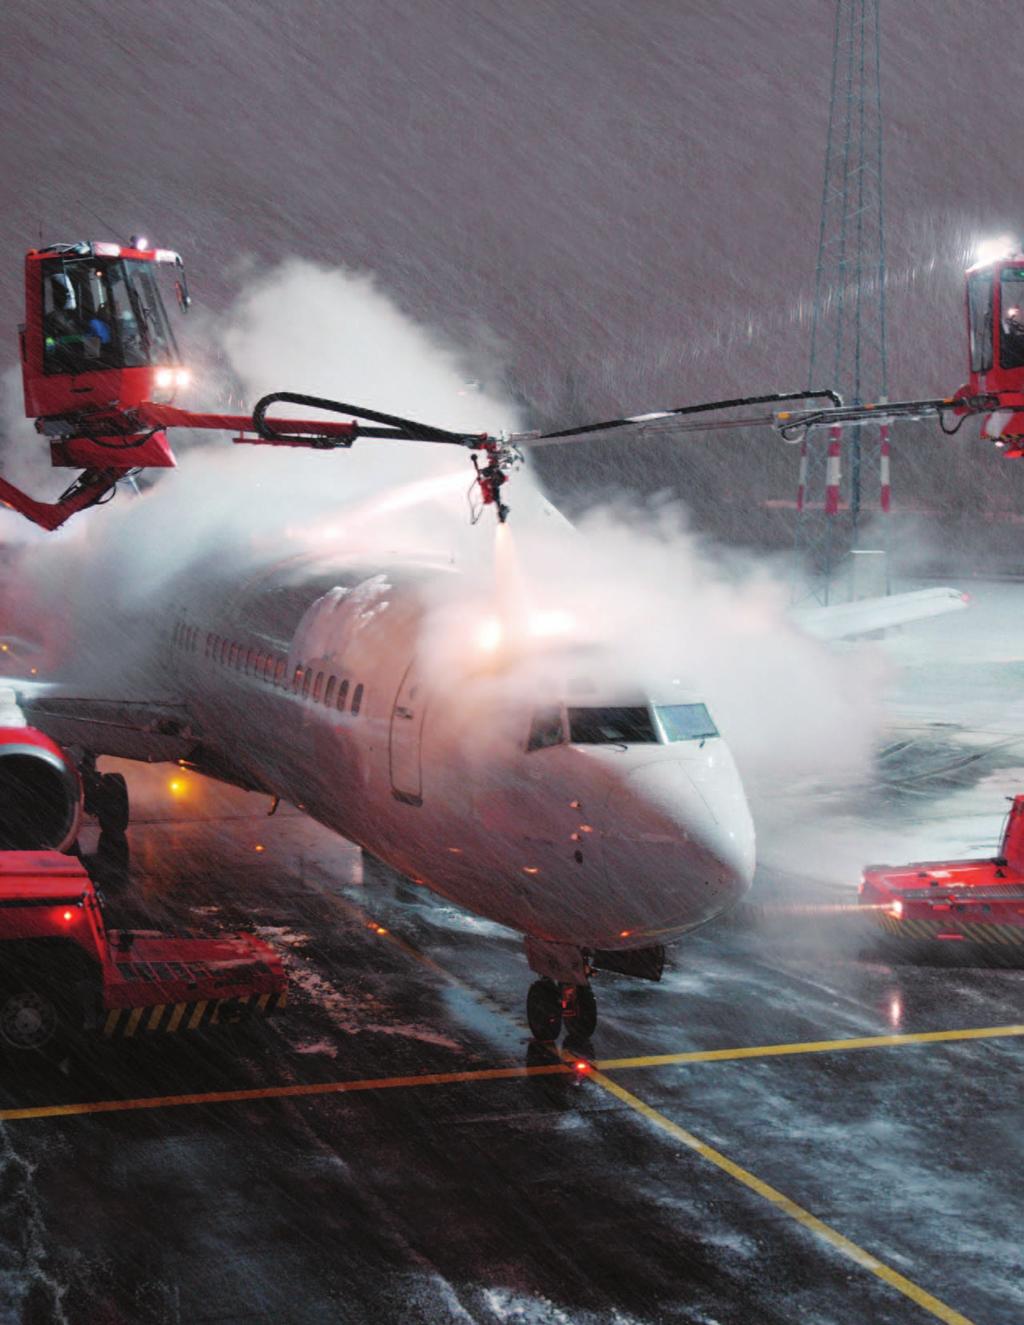 Airlines need to be aware of recent developments in winter